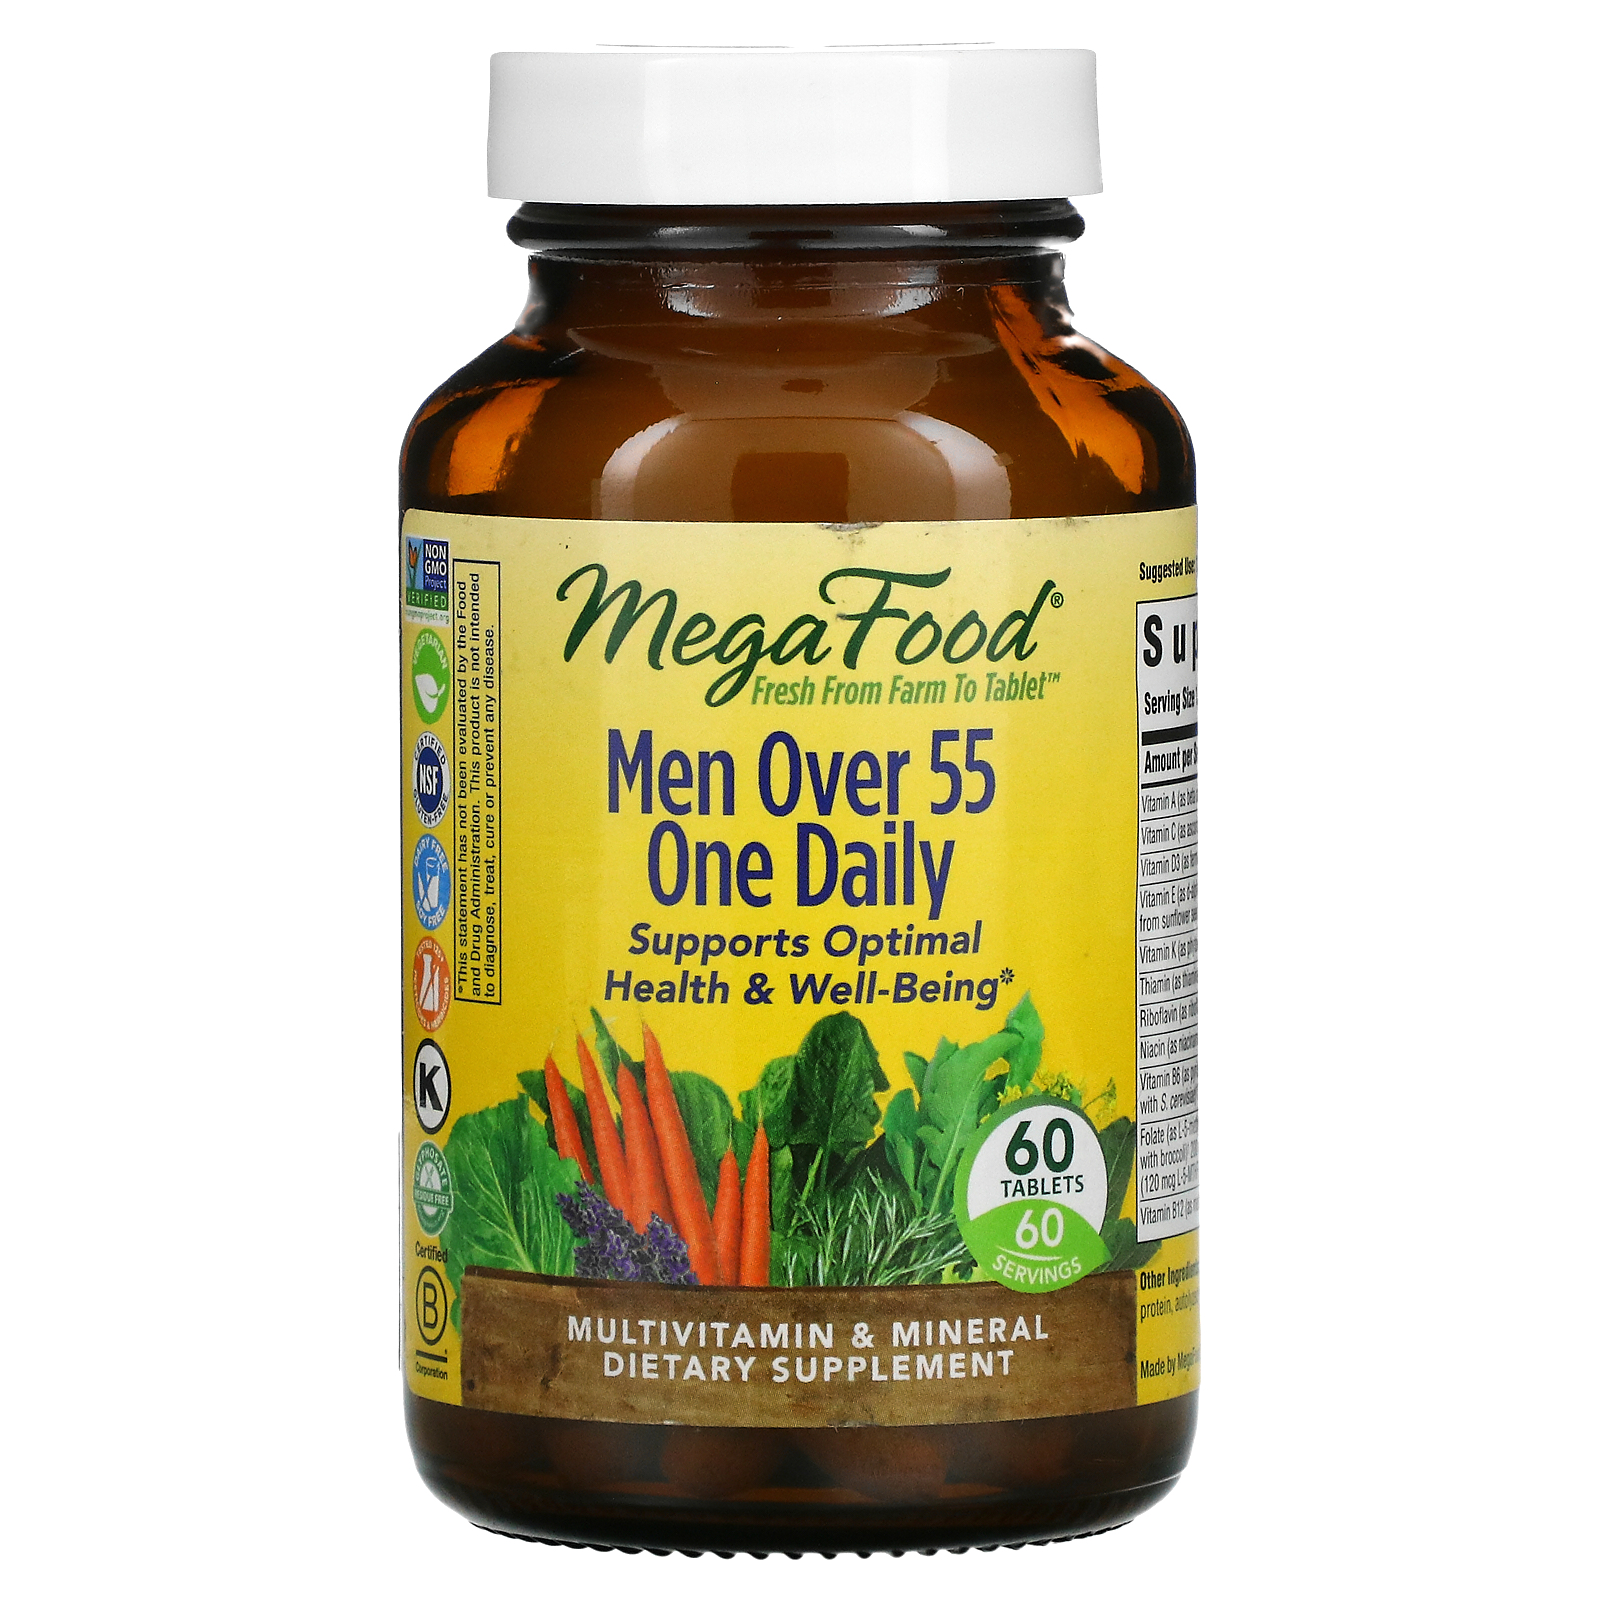 Megafood Men Over 55 One Daily 60 Tablets Iherb 